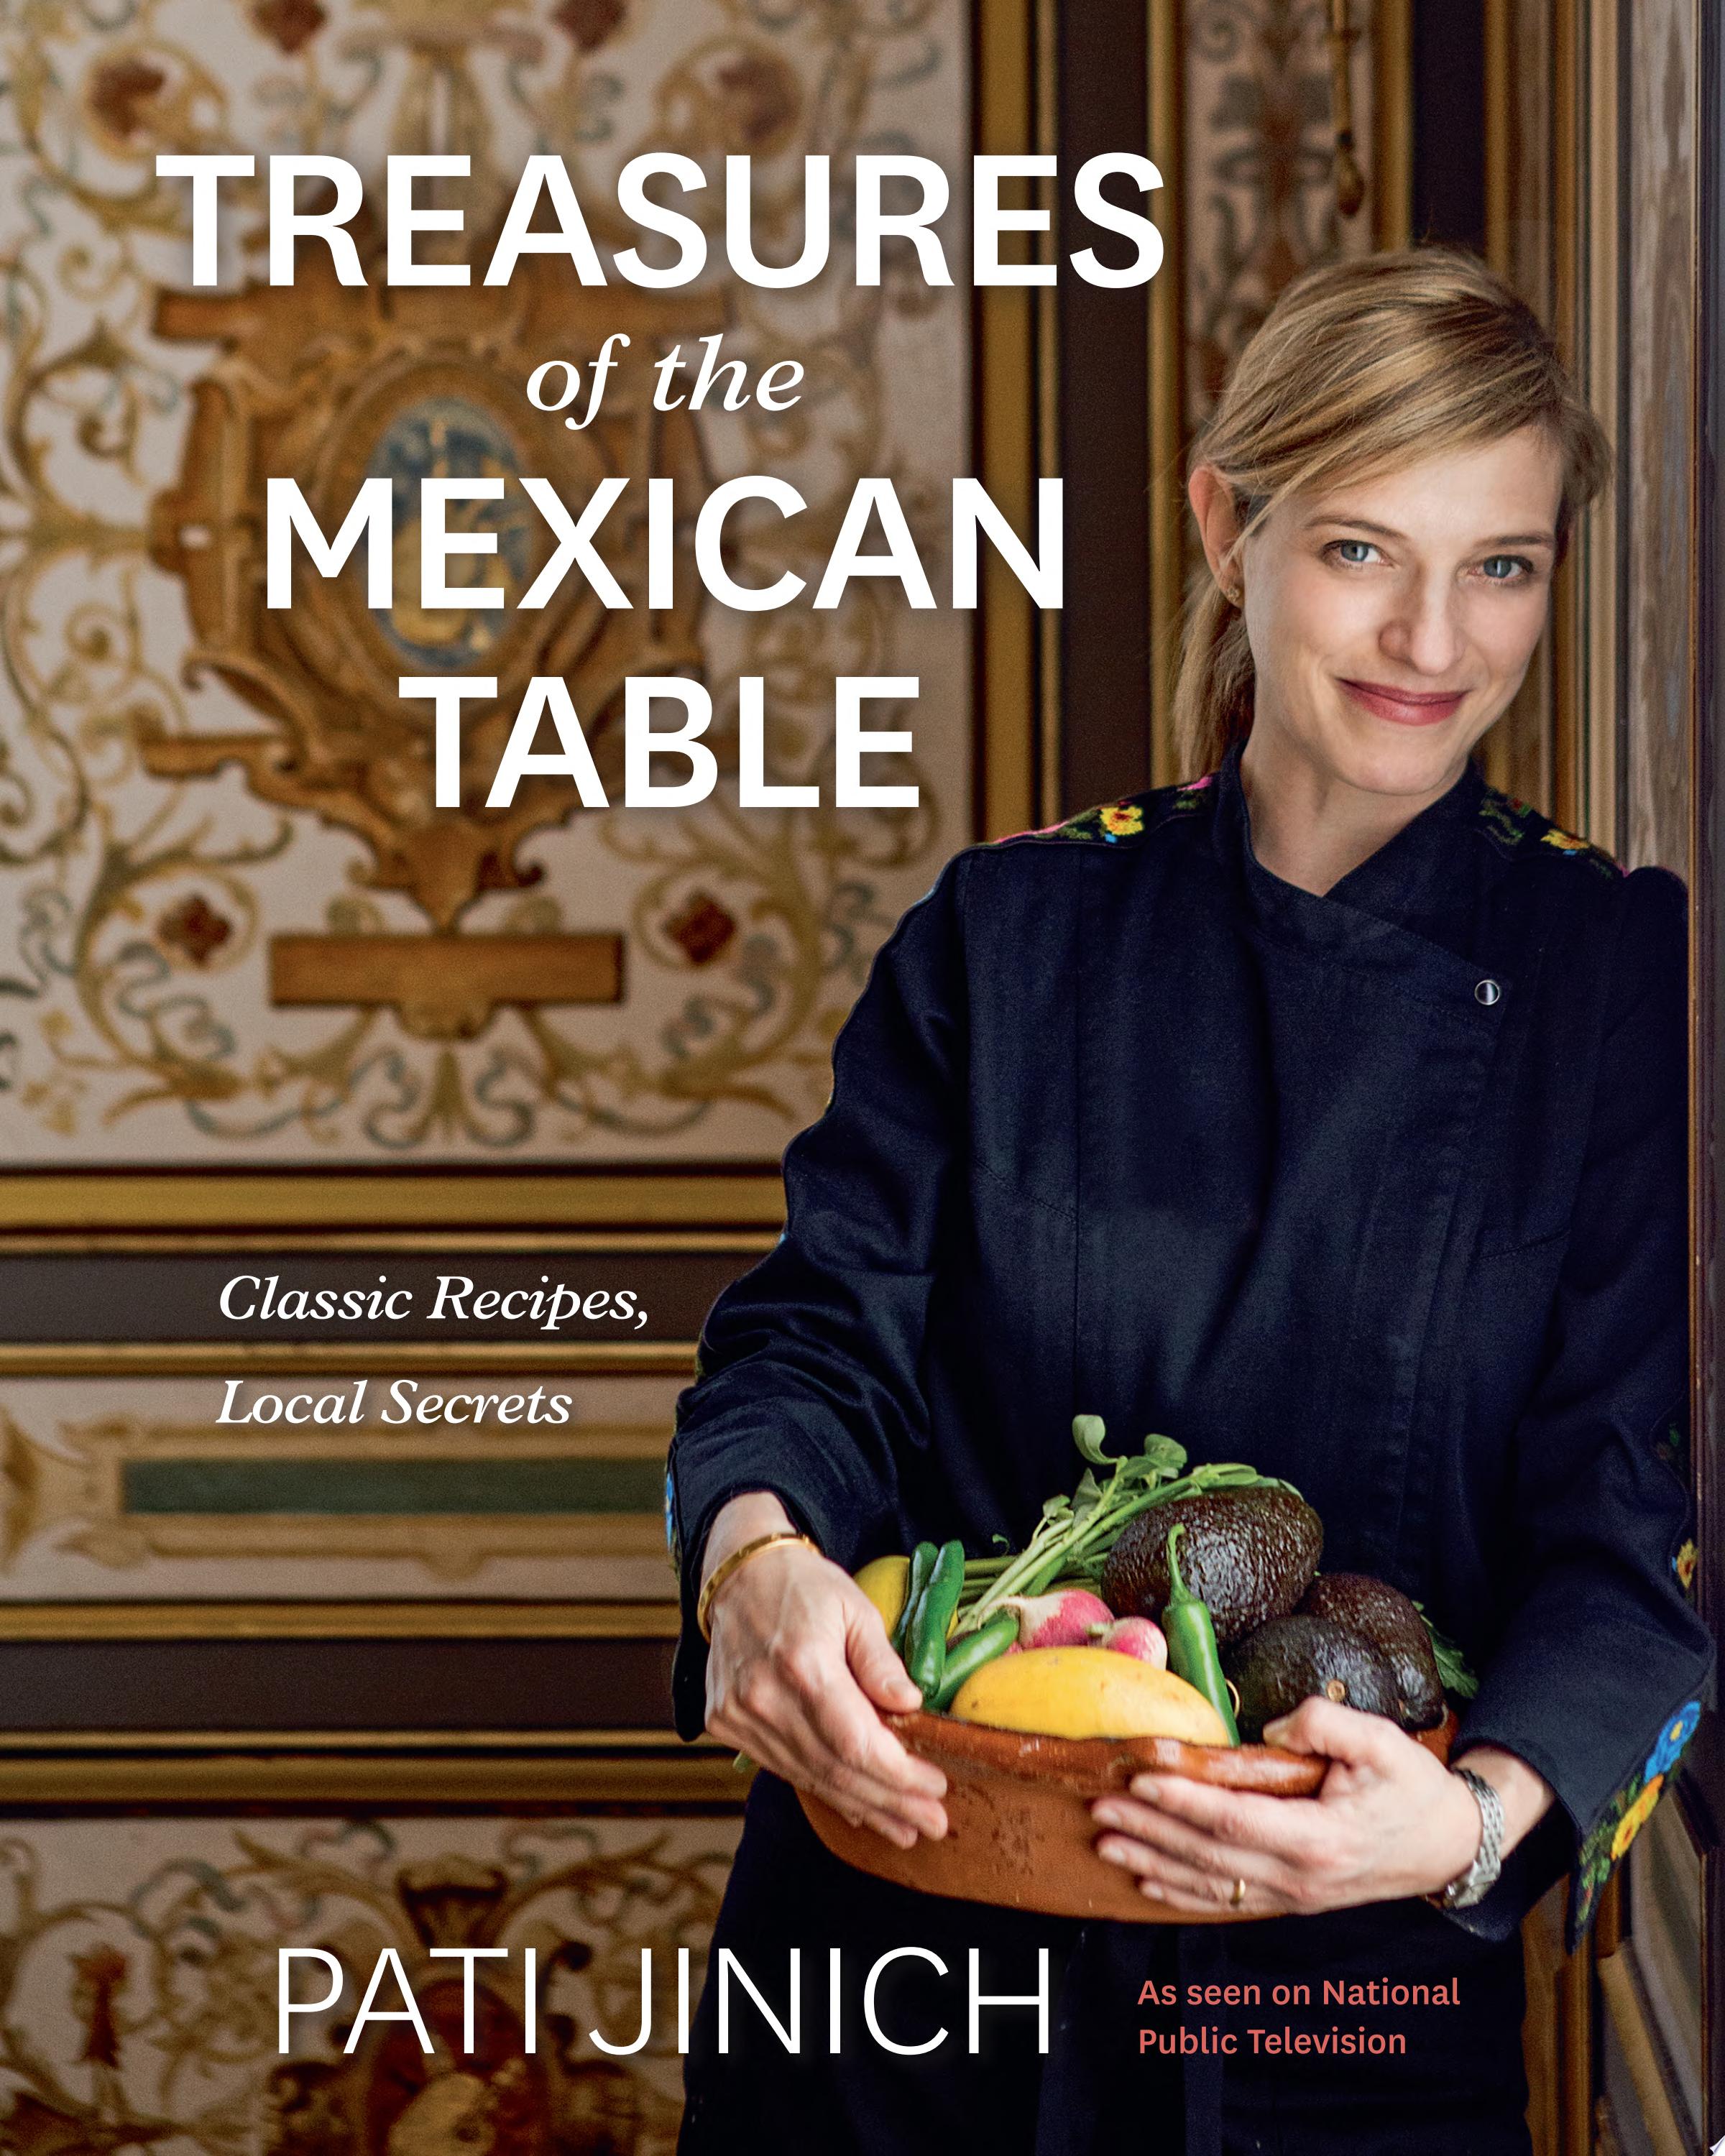 Image for "Pati Jinich Treasures of the Mexican Table"